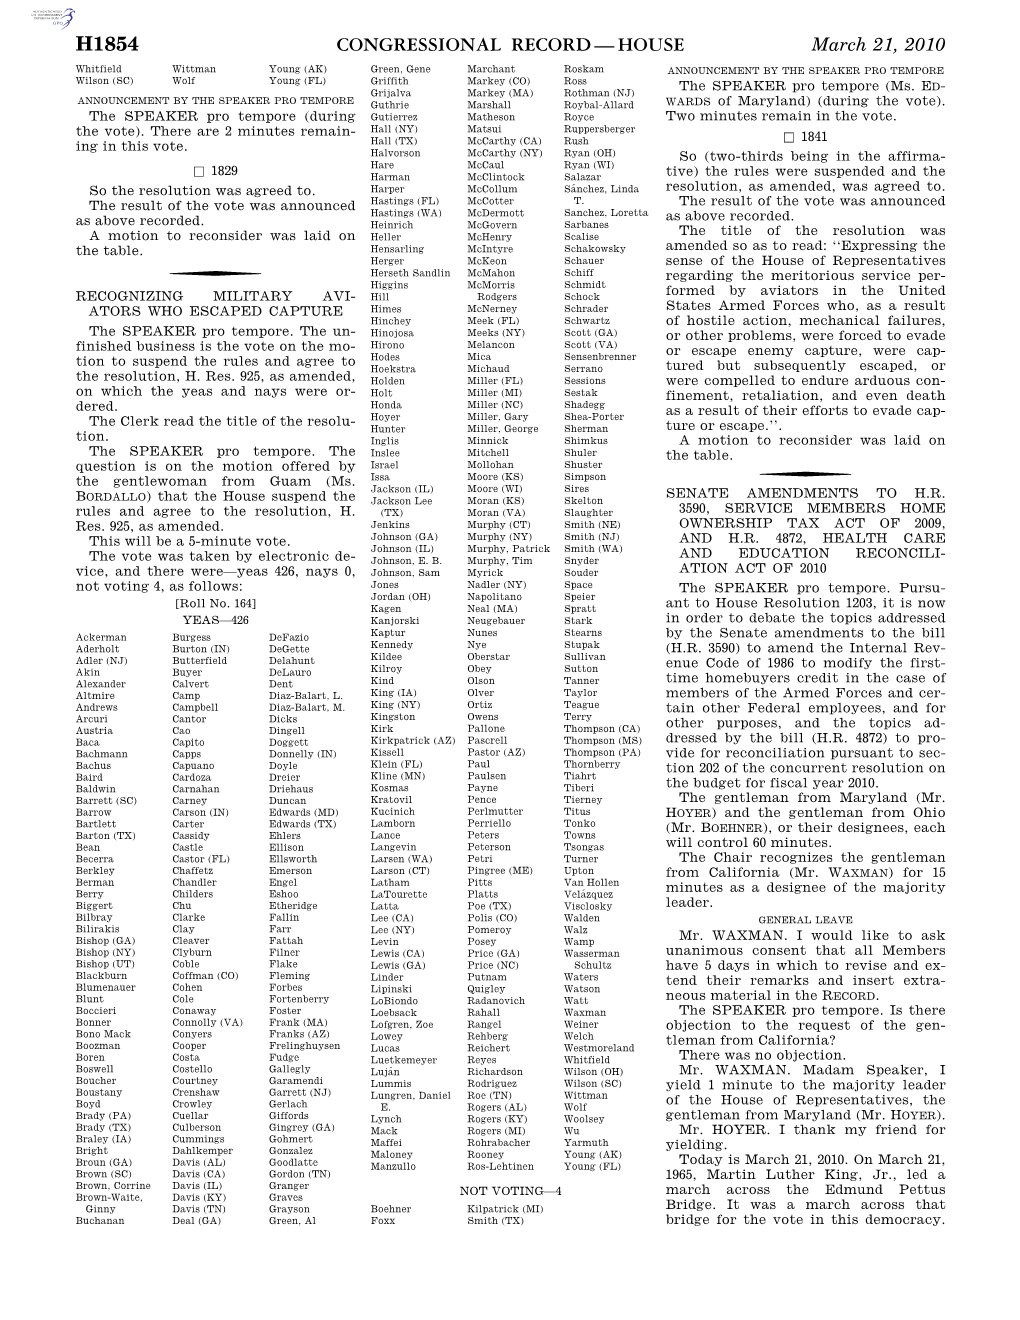 Congressional Record—House H1854